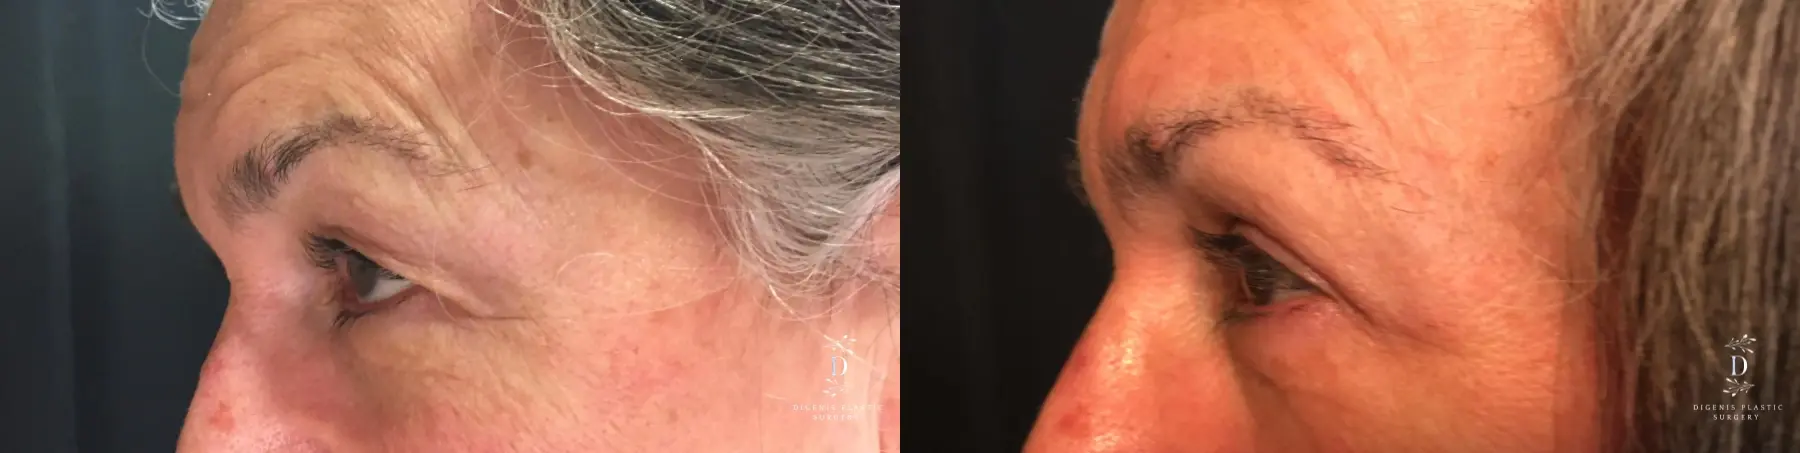 Eyelid Surgery: Patient 22 - Before and After 5